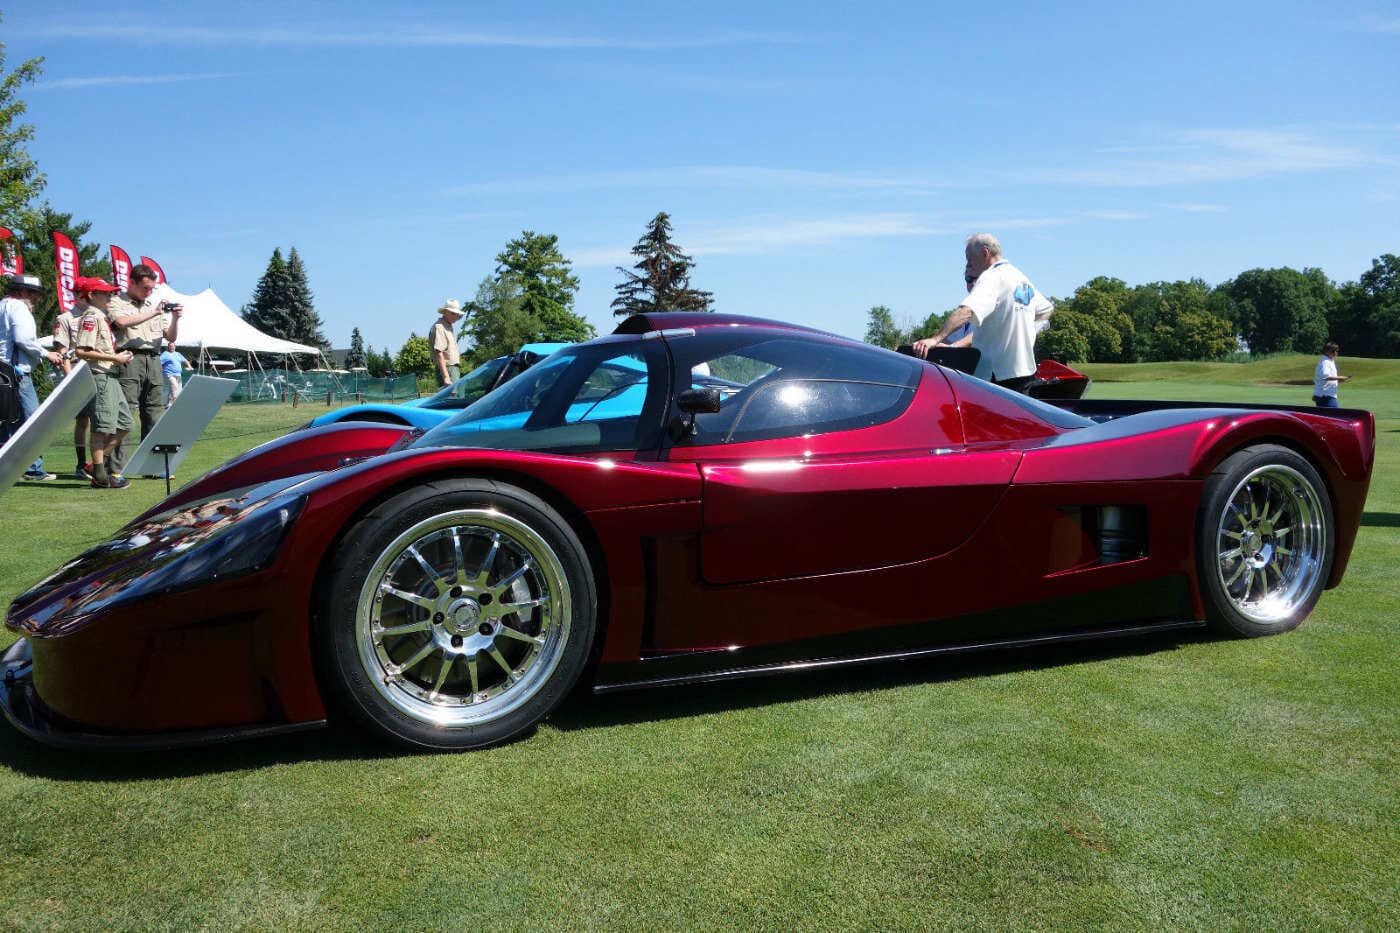 10 CHEAP Kit Cars That Can Make You Seem Incredibly Wealthy